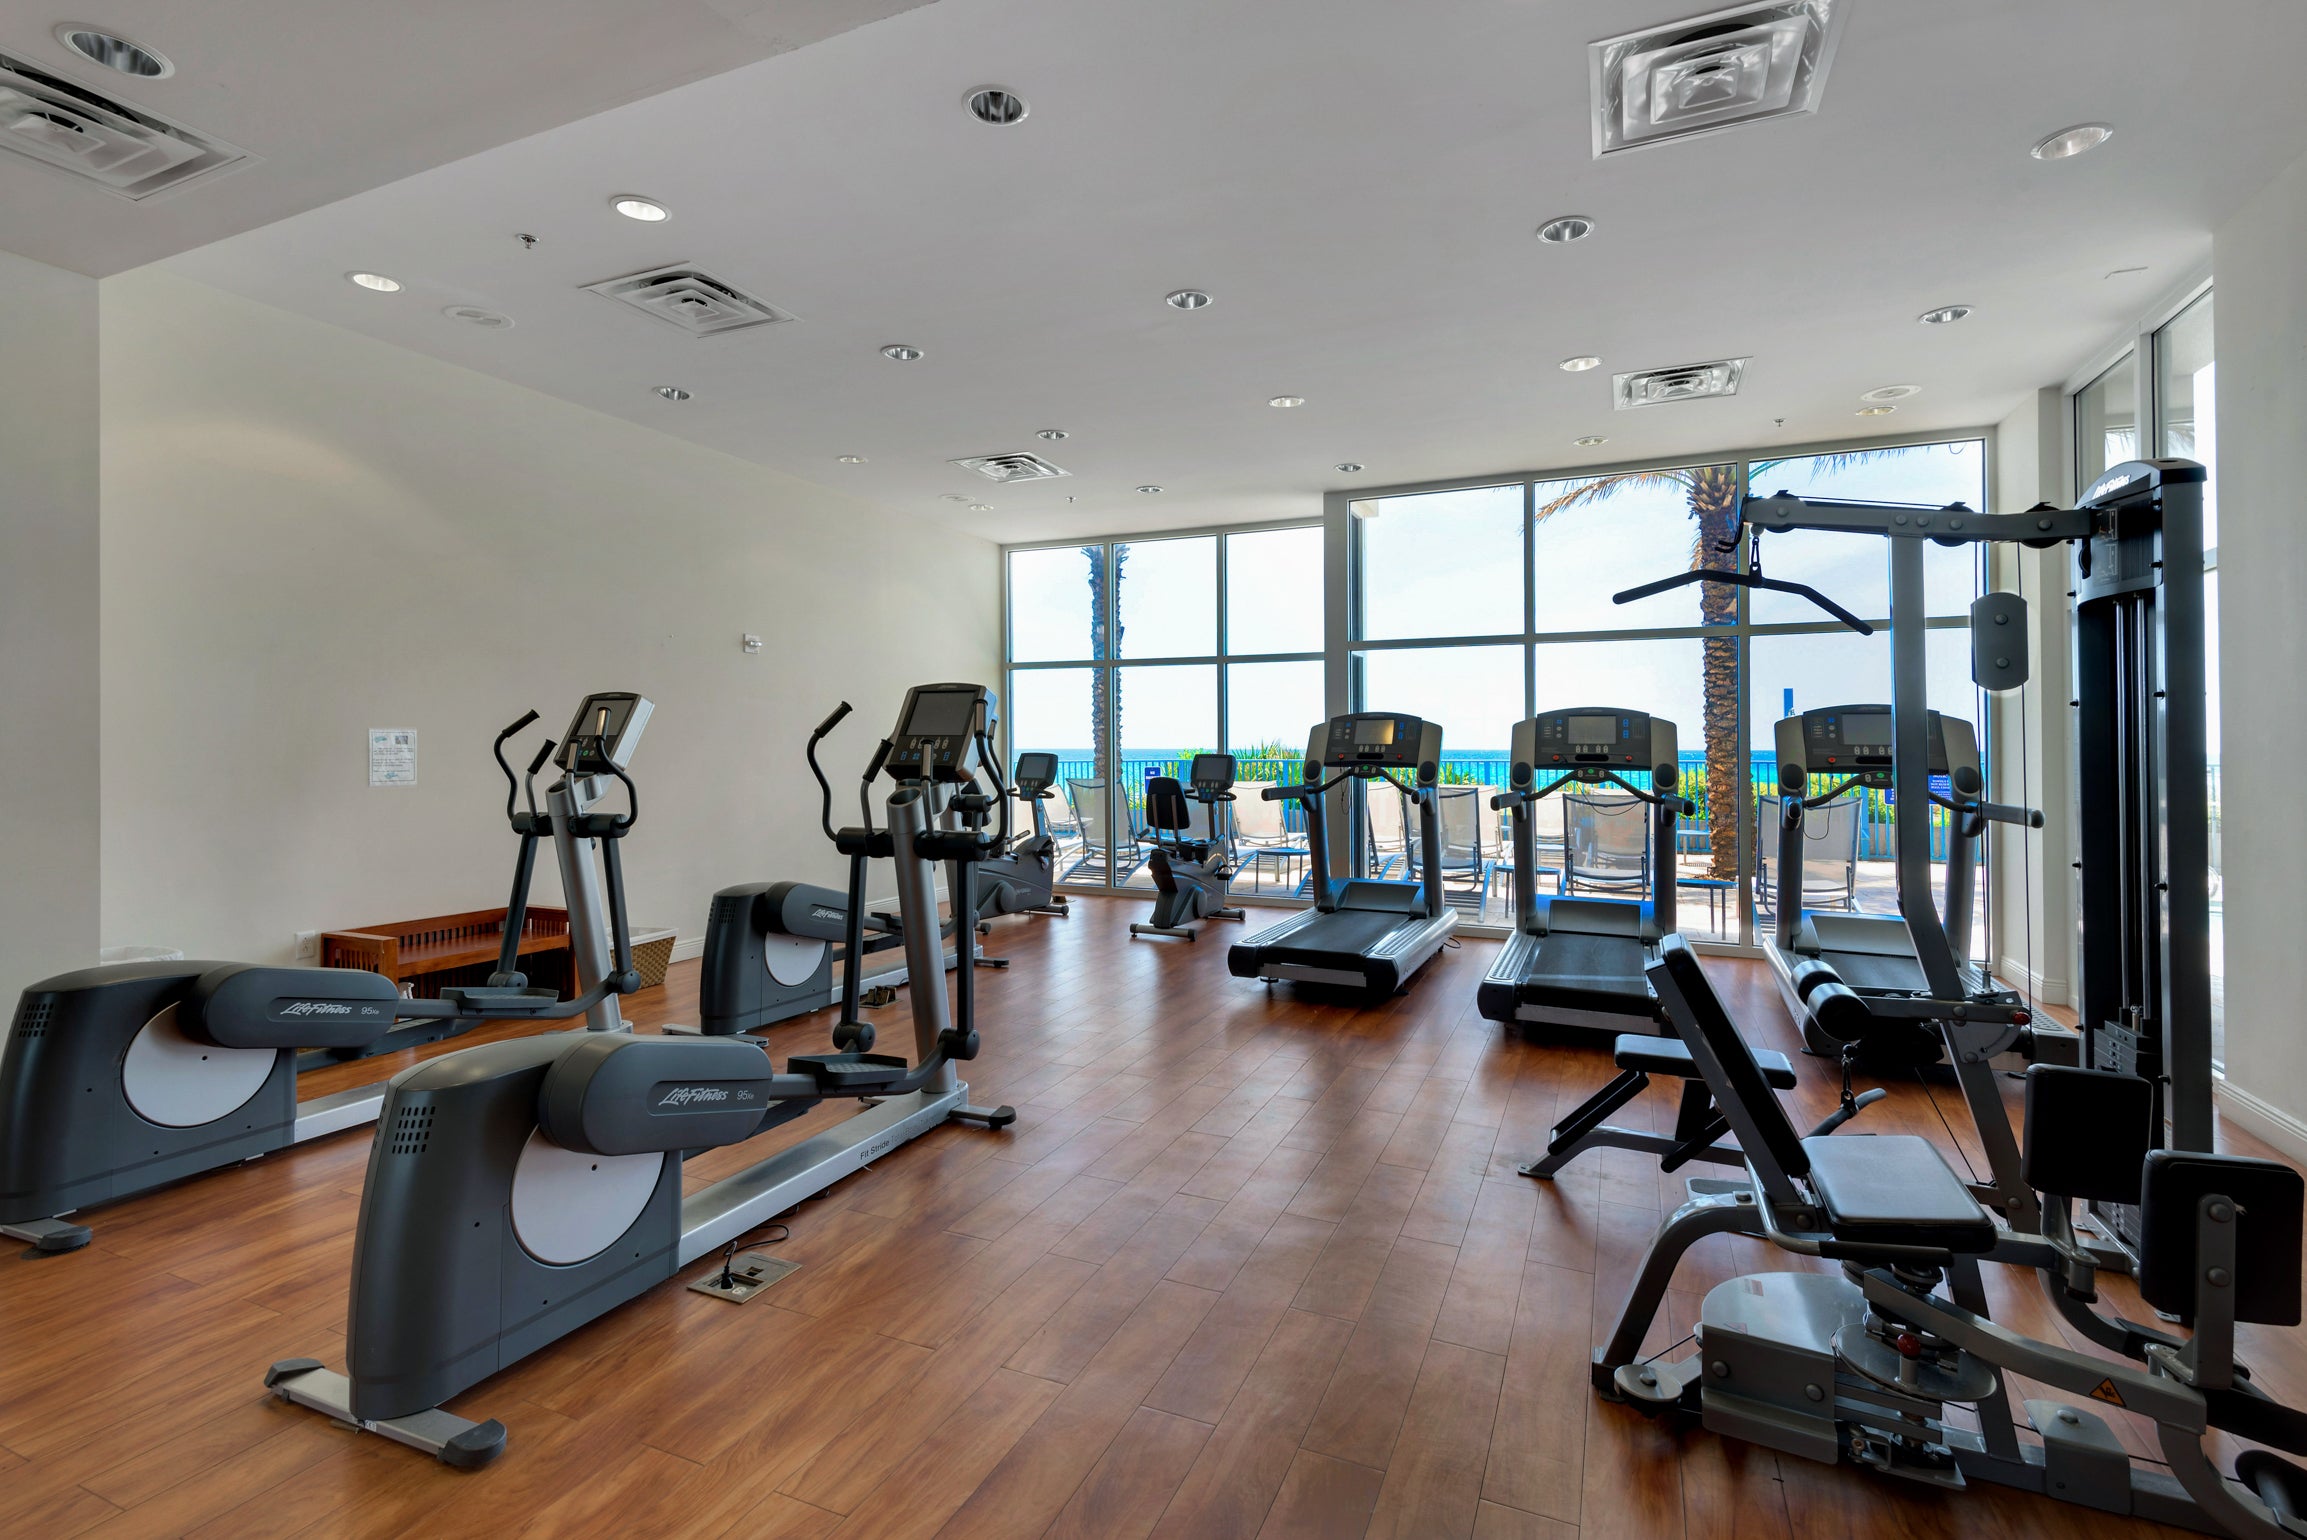 Fitness Room overlooking the Gulf